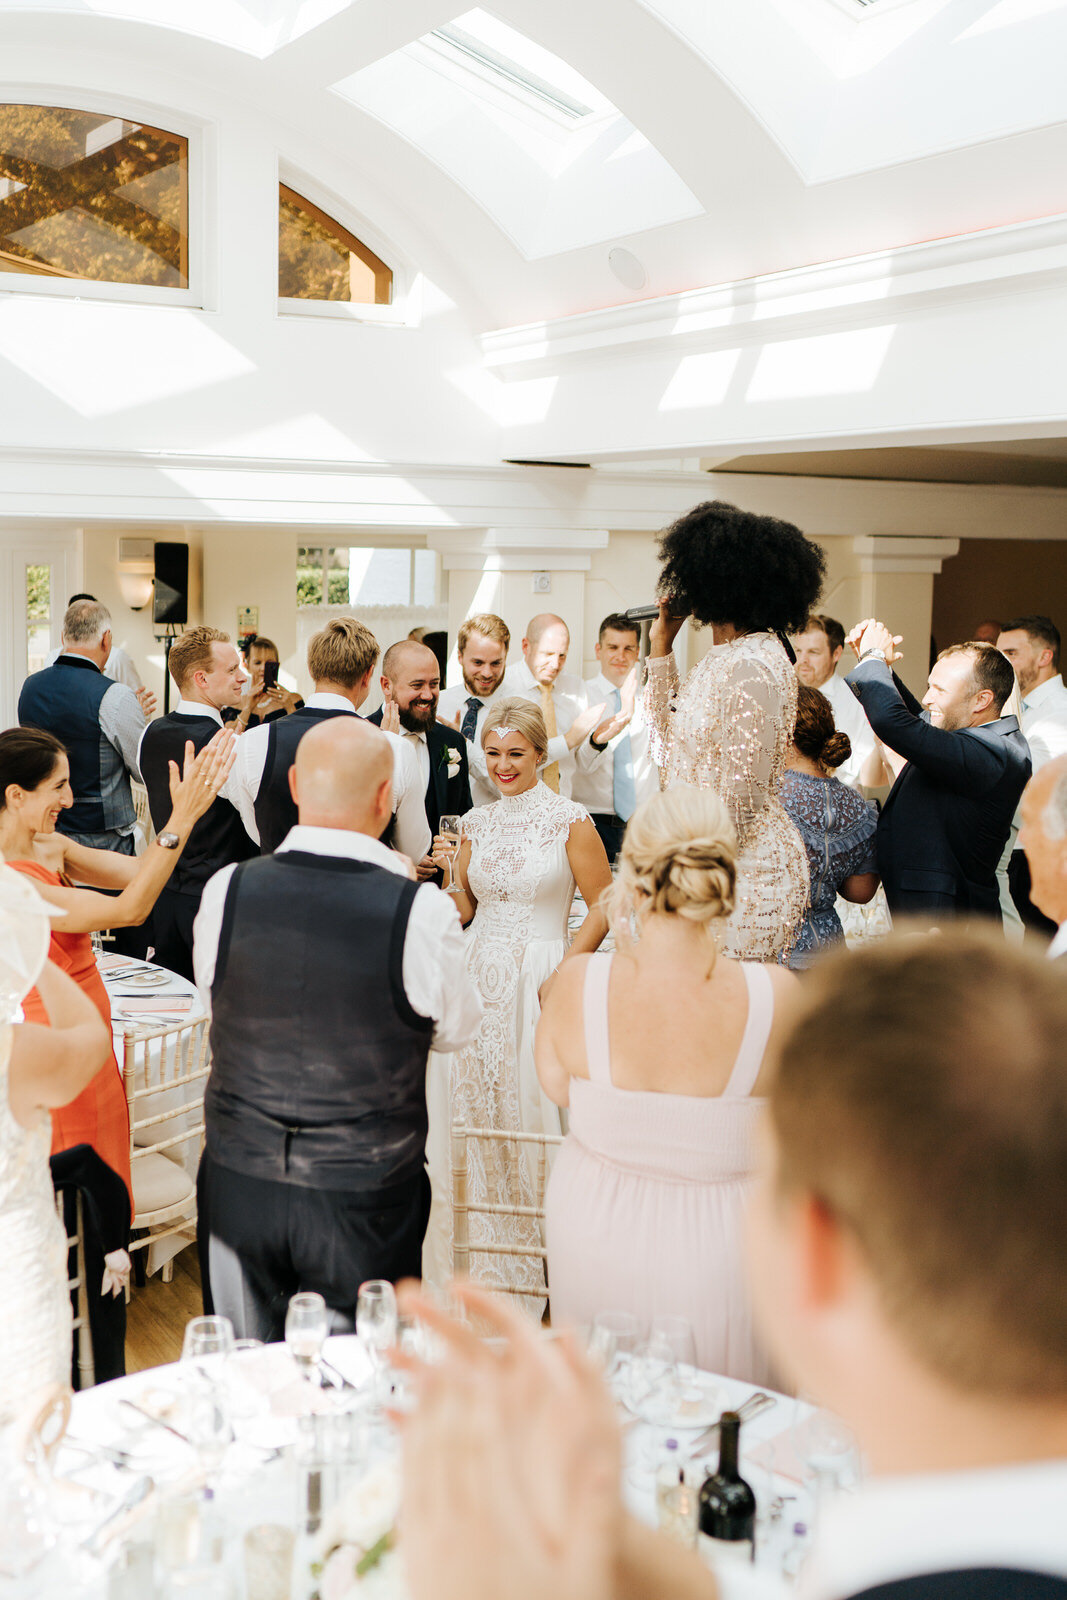 Bride and groom make their entrance into the wedding room as guests stand and cheer all around them